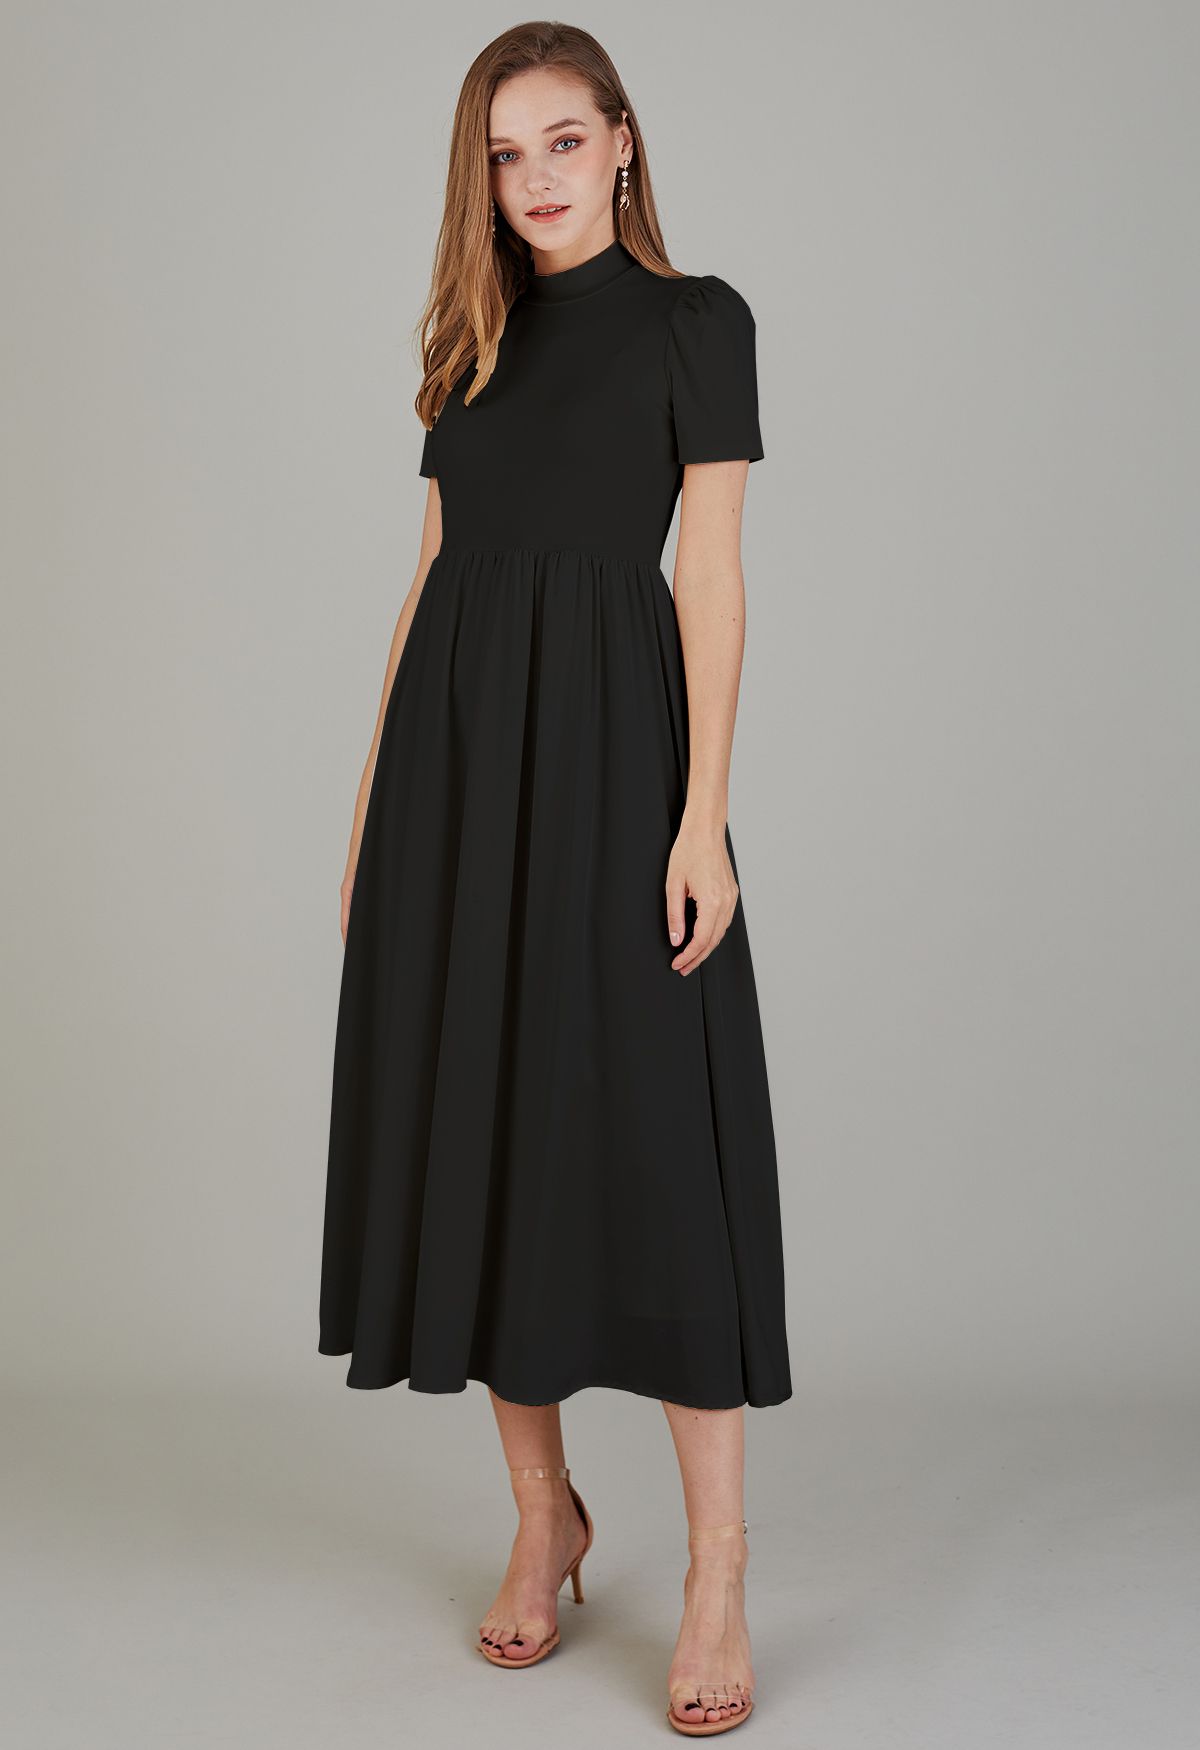 Pearly Cutout Back Short-Sleeve Dress in Black